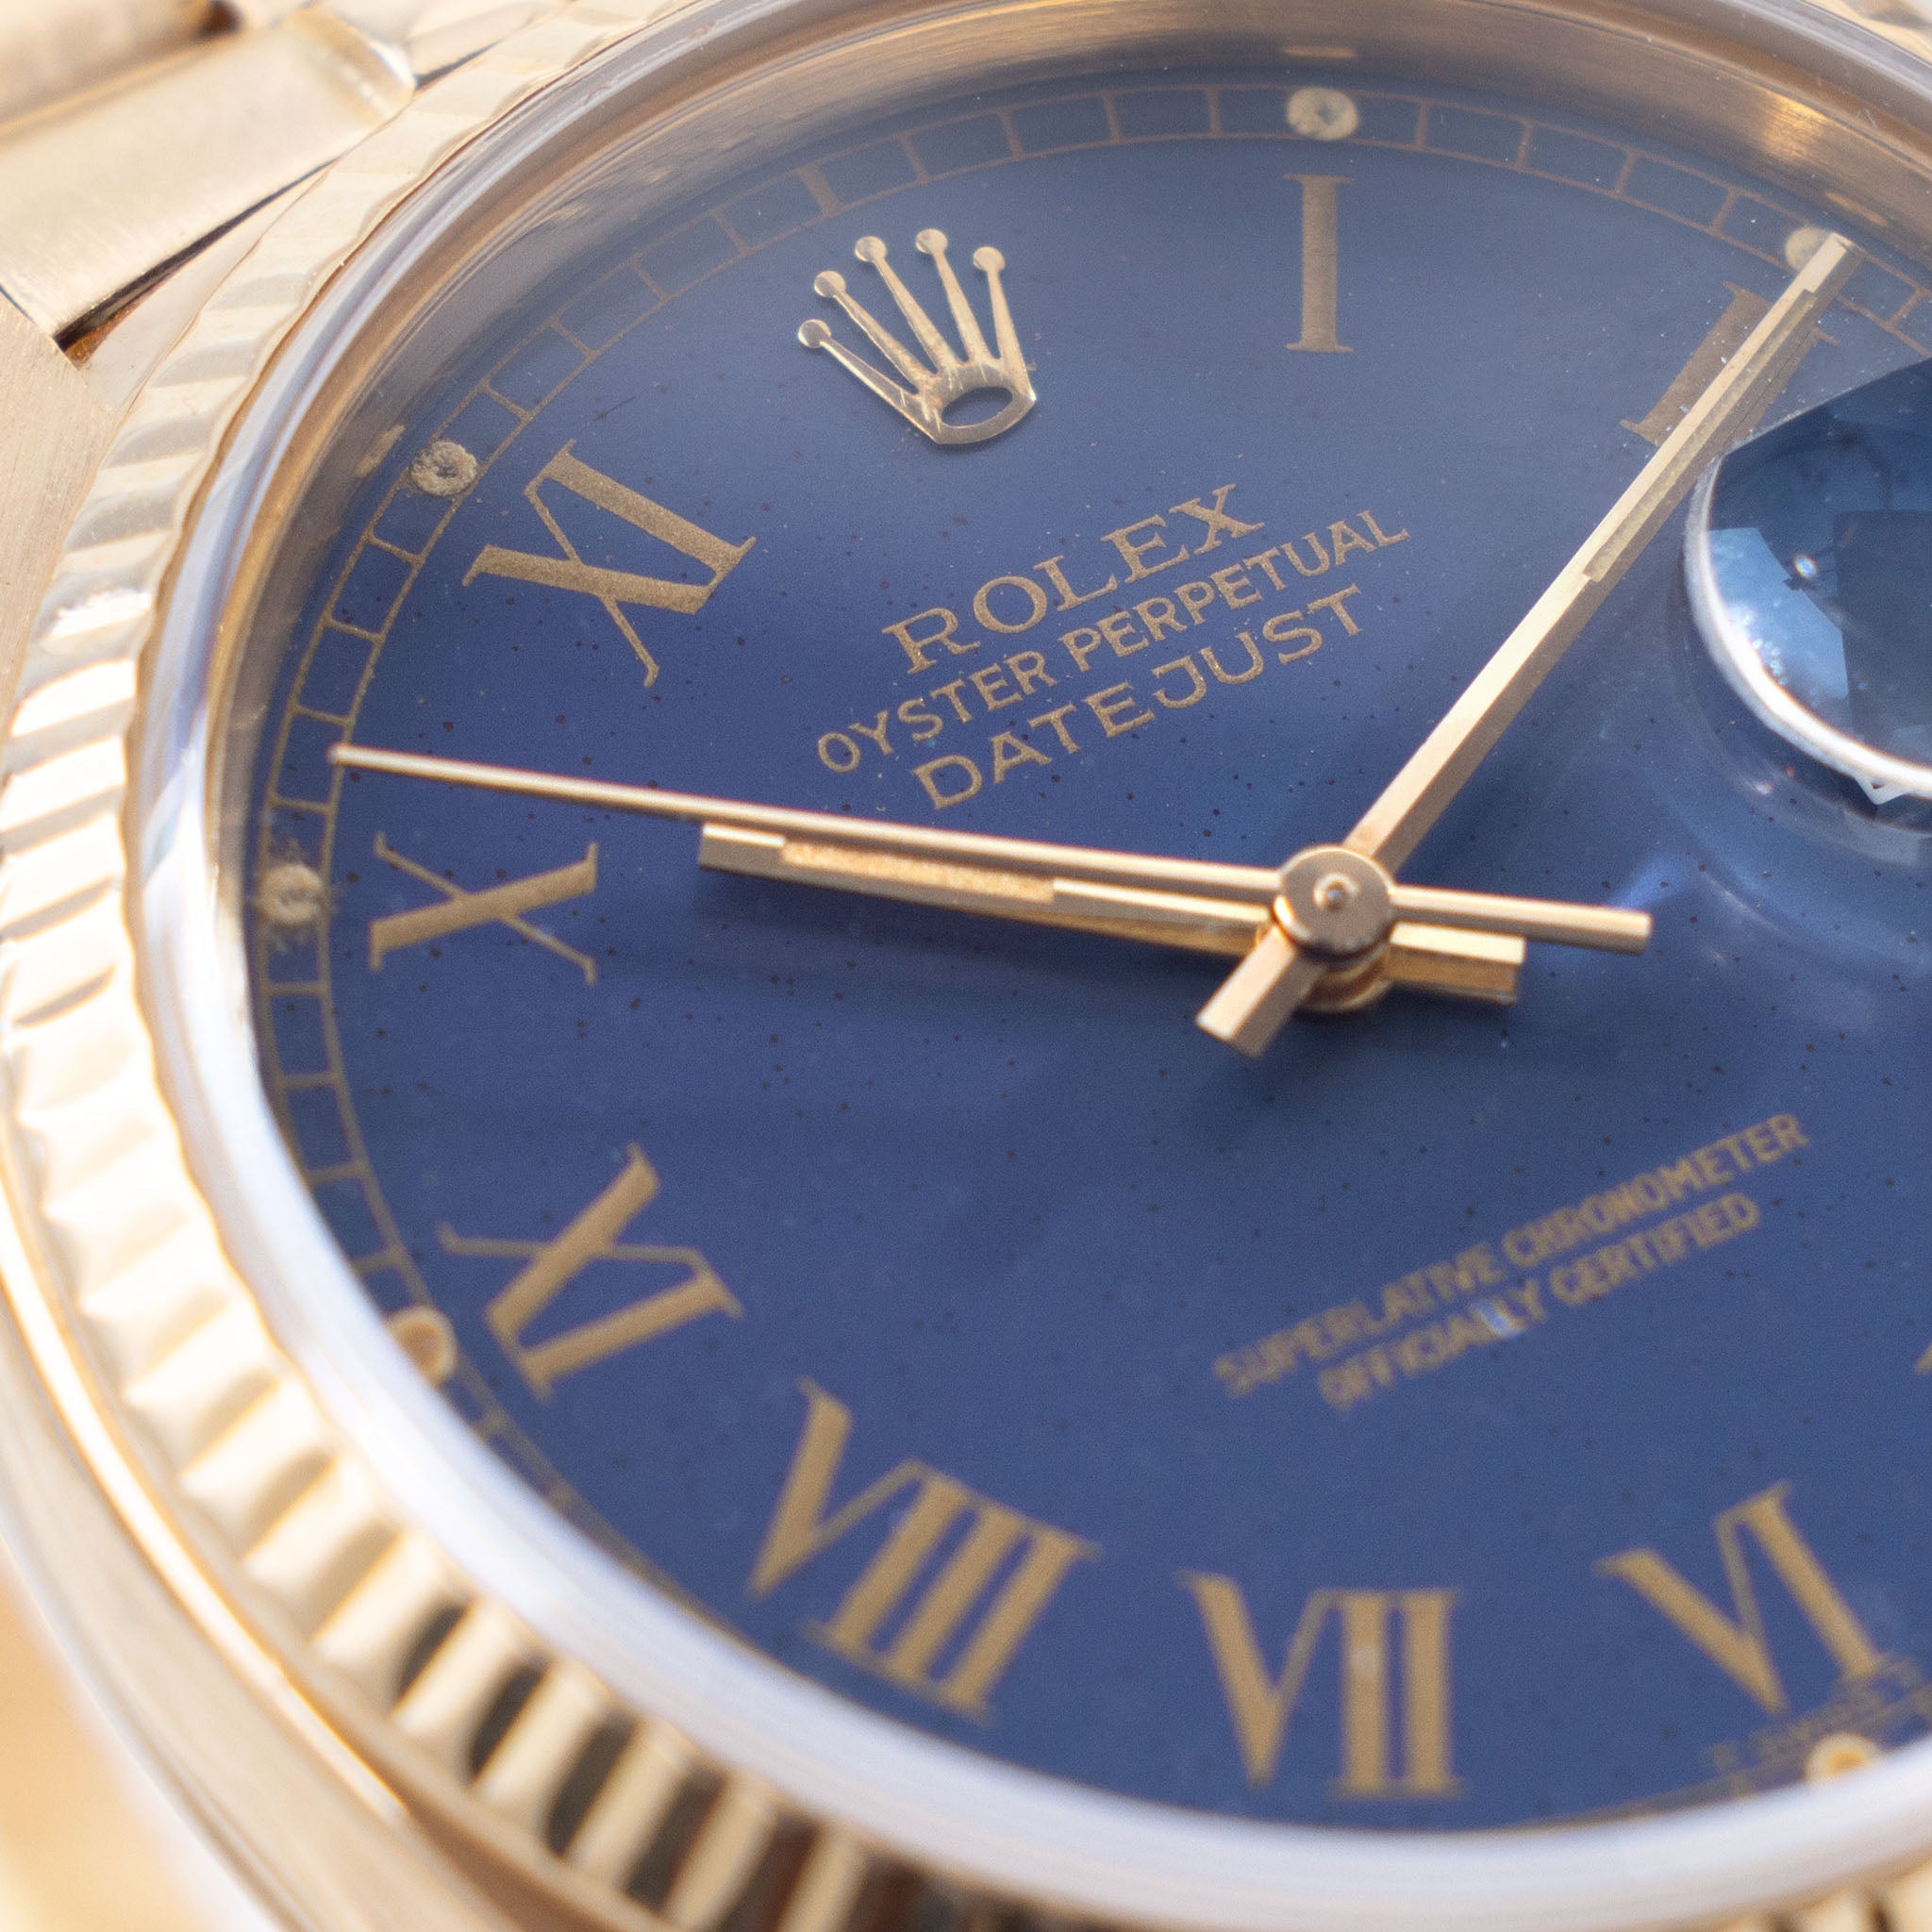 Rolex Datejust Yellow Gold Blue Buckley Dial Ref 16018